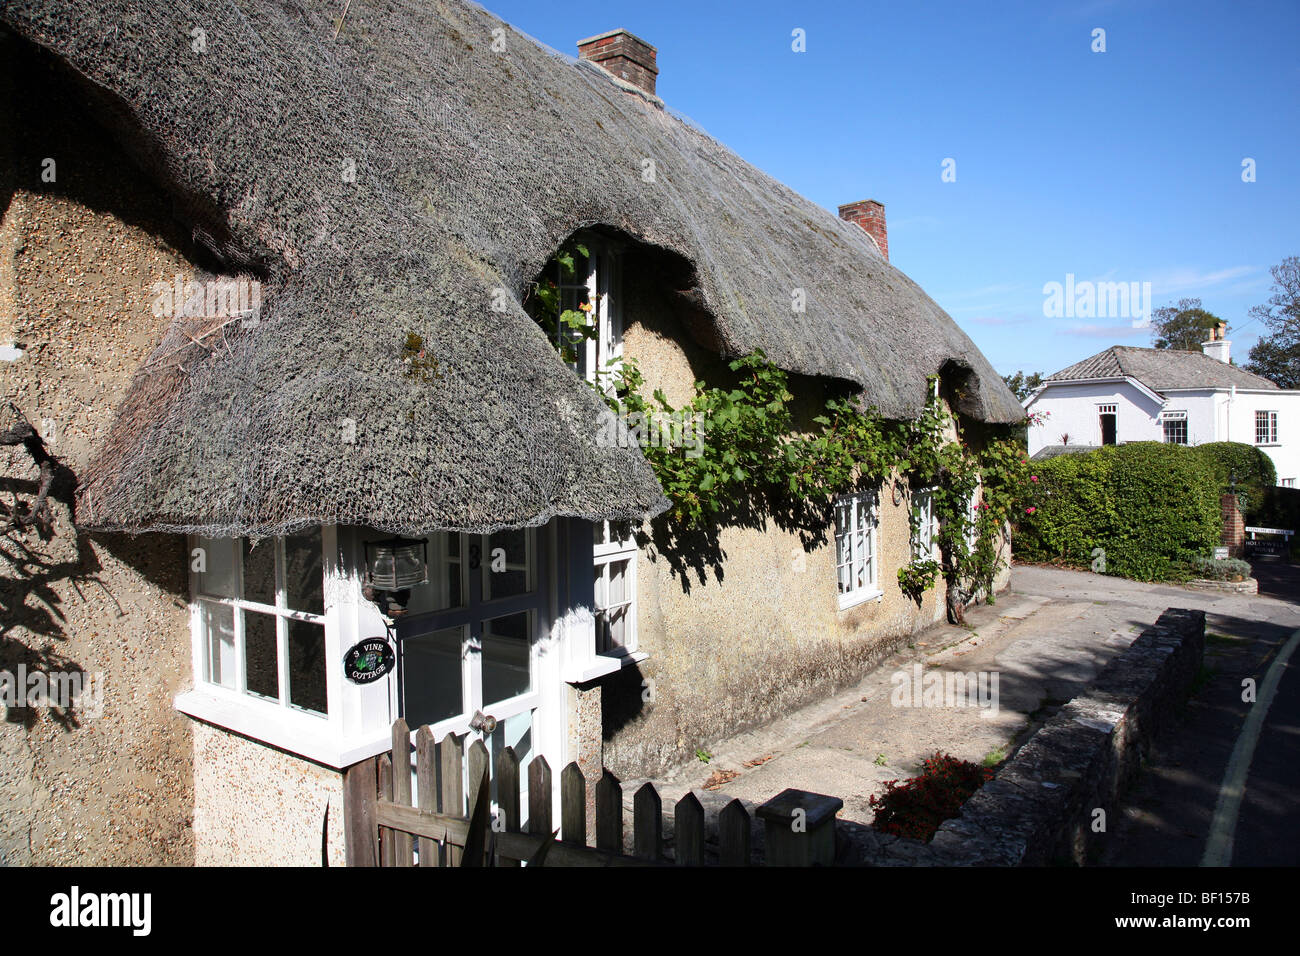 A picture perfect cottage in the Dorset seaside village of Studland on the Isle of Purbeck Stock Photo